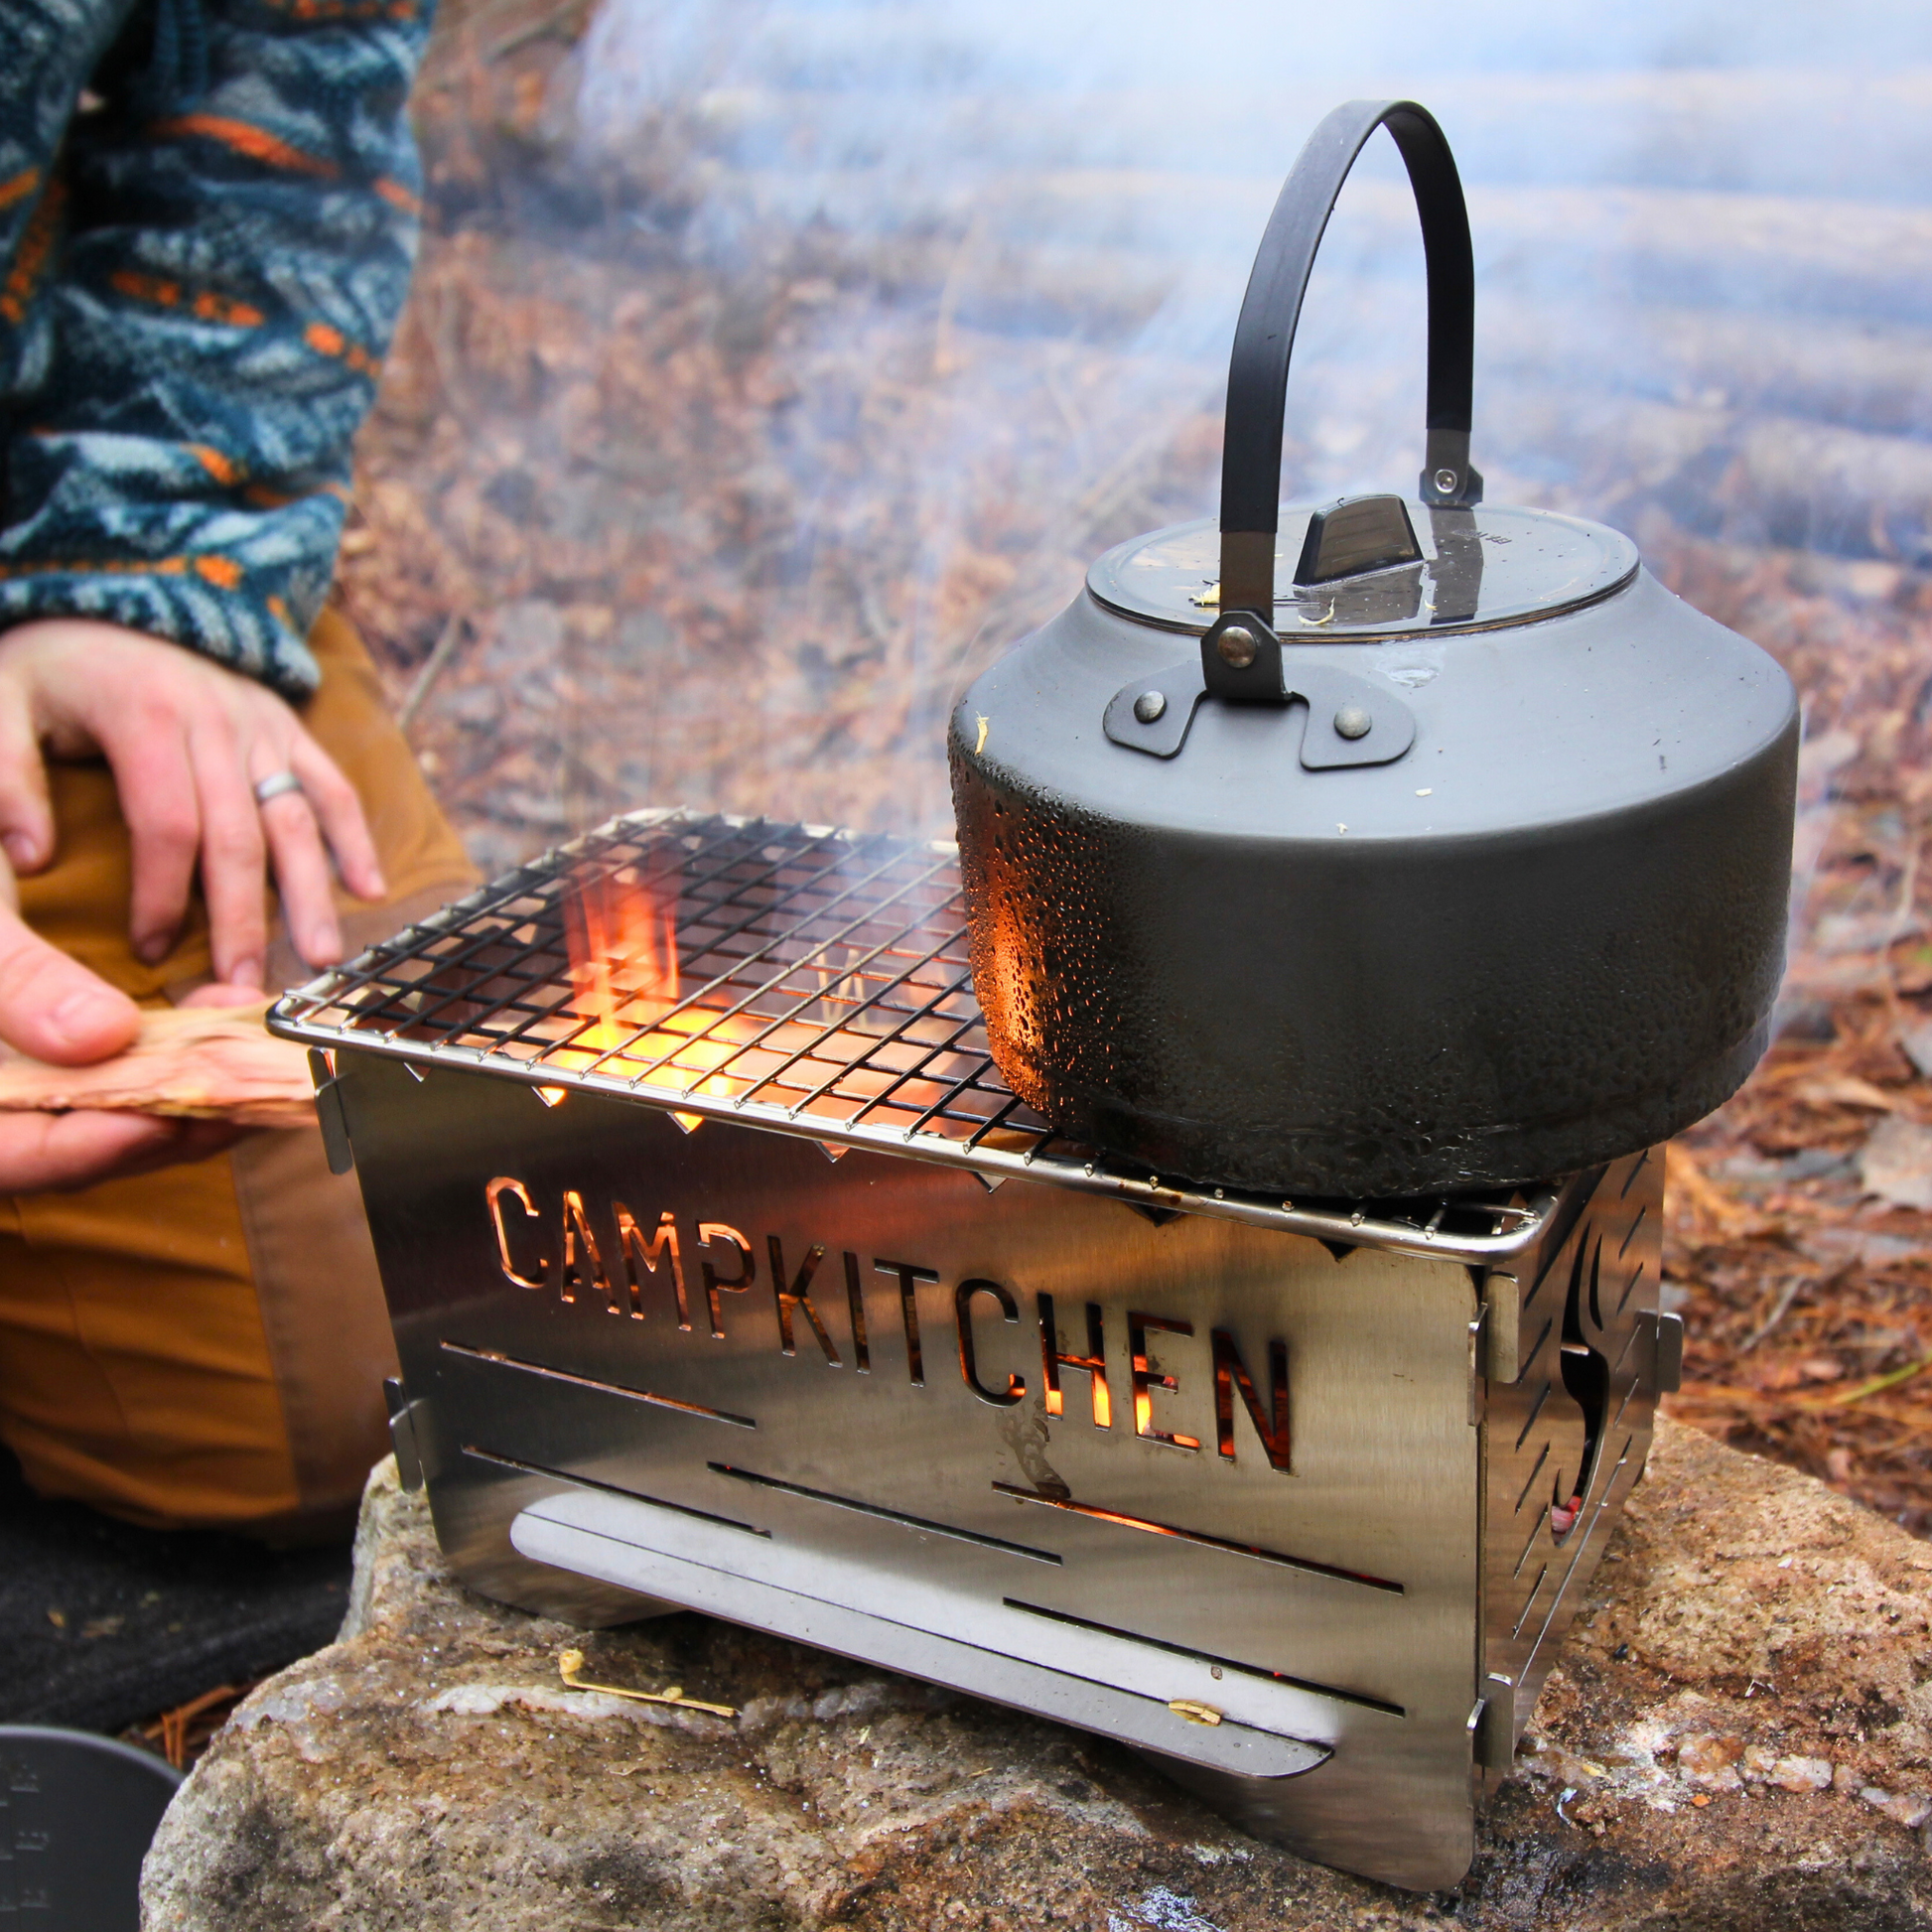 CAMPKITCHEN Twig Stove in action. Stove is lit with a teapot on the right side. Flames appear through the left side of the grate showcasing space to grill or to add another pot/pan.